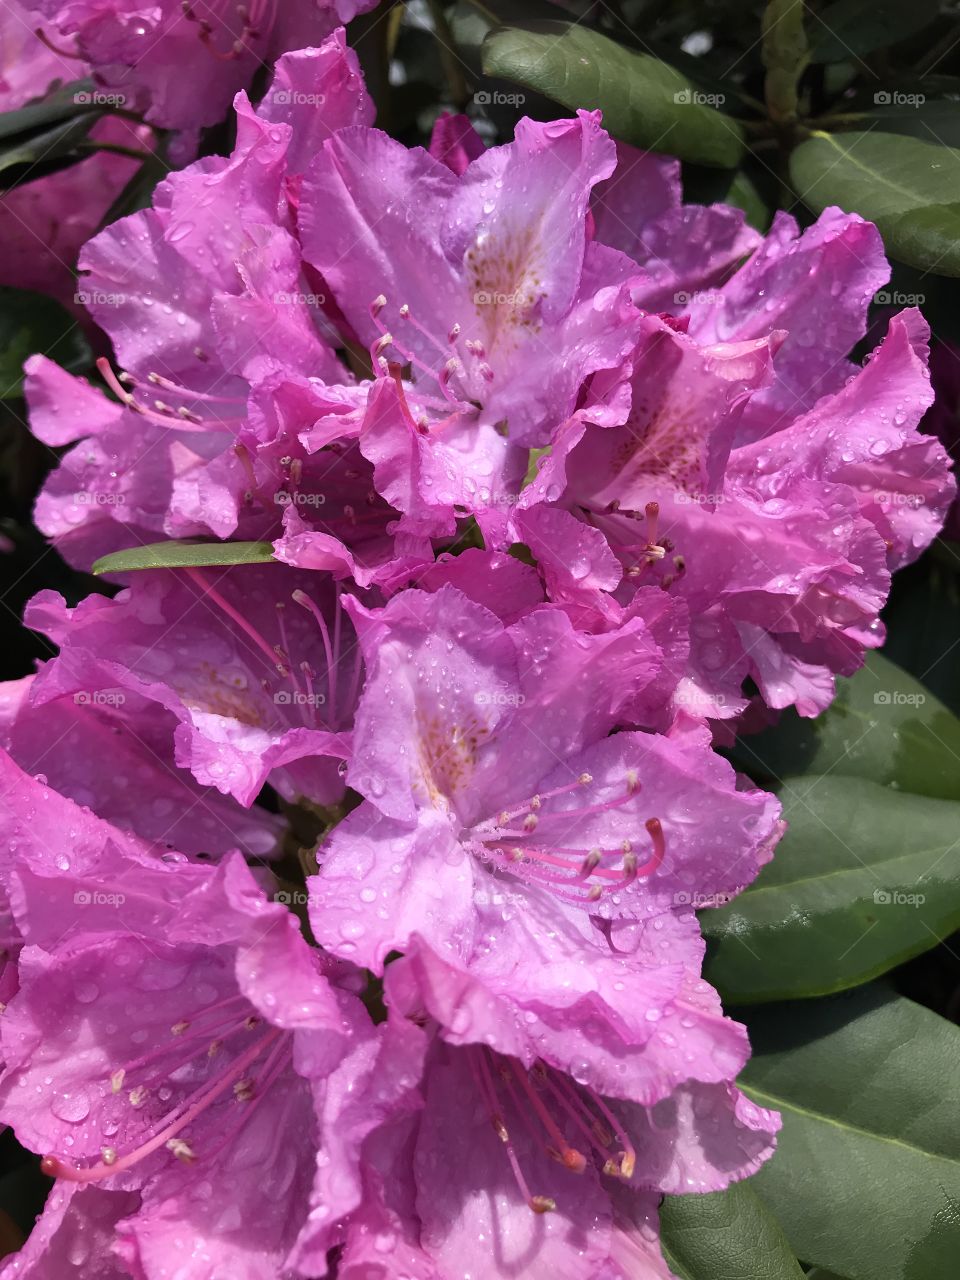 Blooming rhododendron 